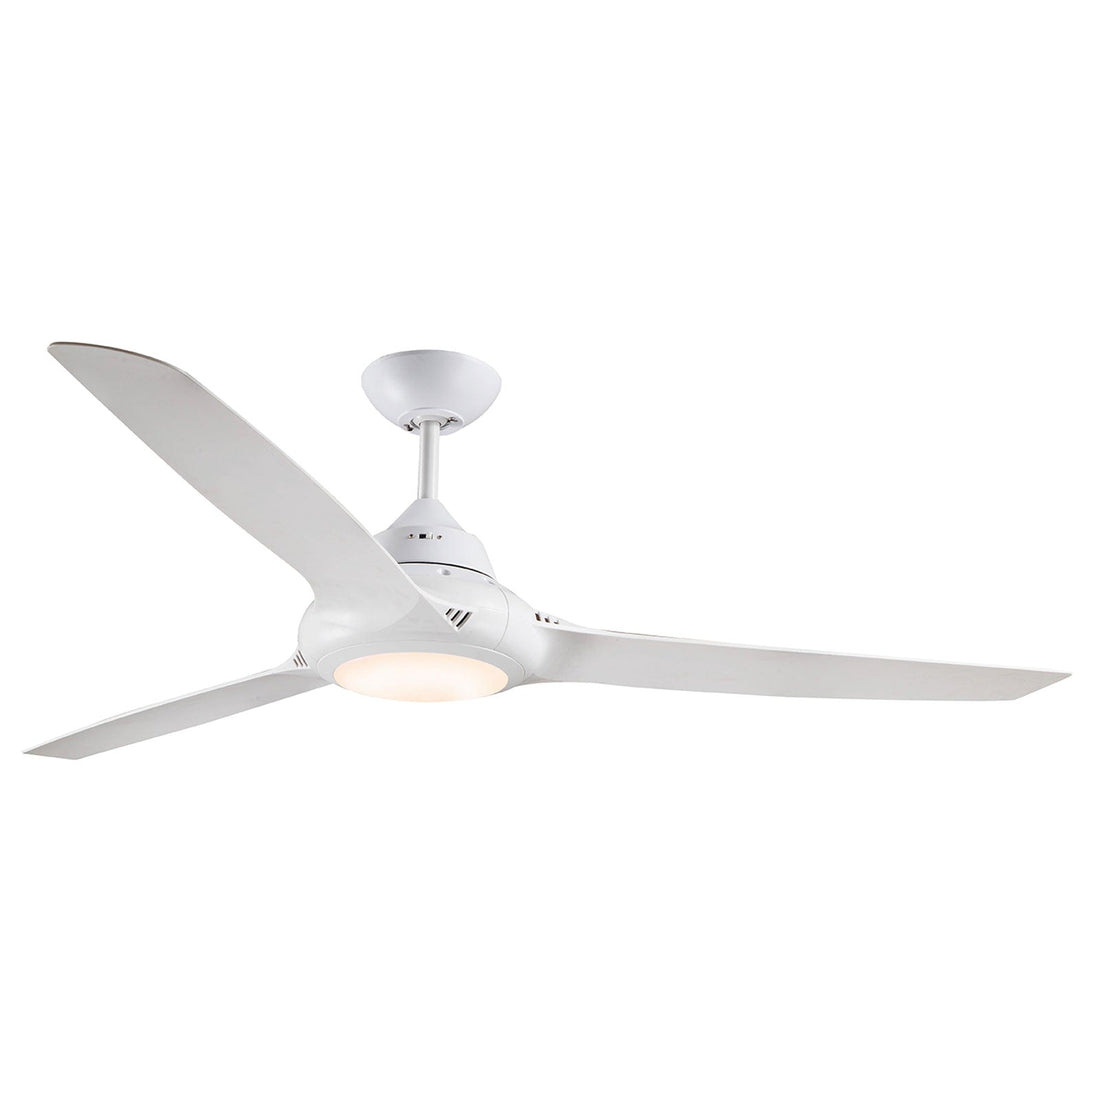 Phaser 58″ AC Ceiling Fan with LED Light Mercator